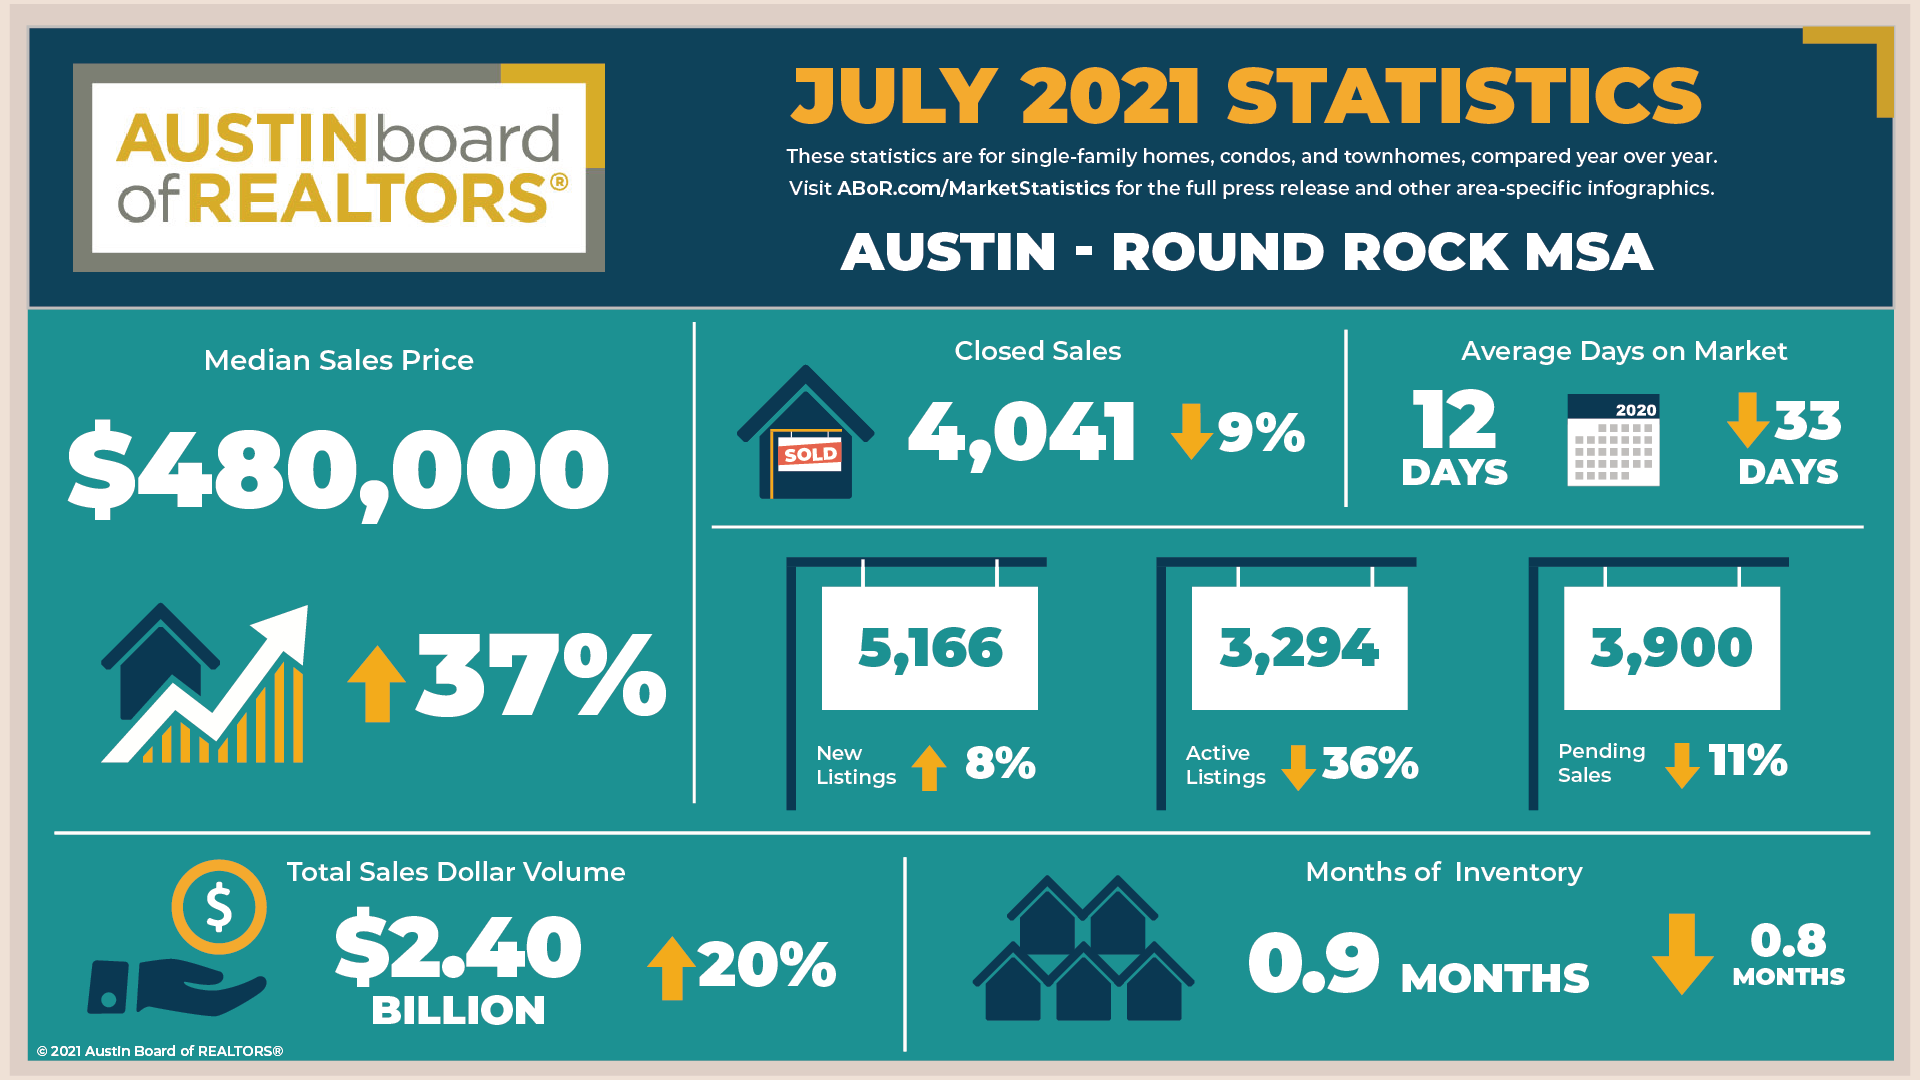 July ABoR Stats are out!